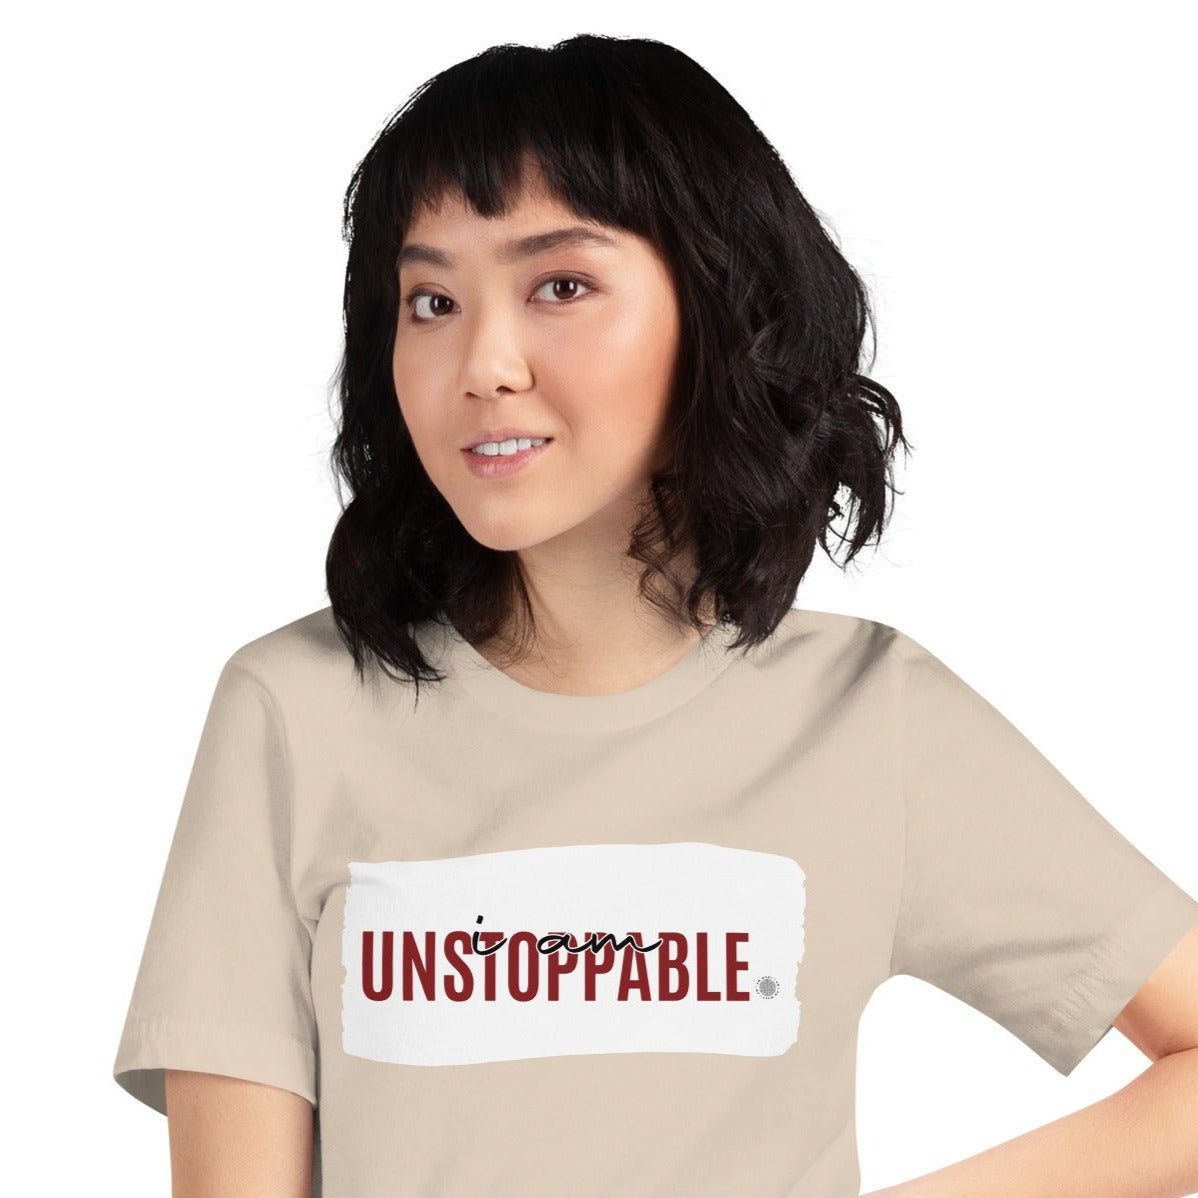 I Am Unstoppable Adult Unisex T-Shirt tan